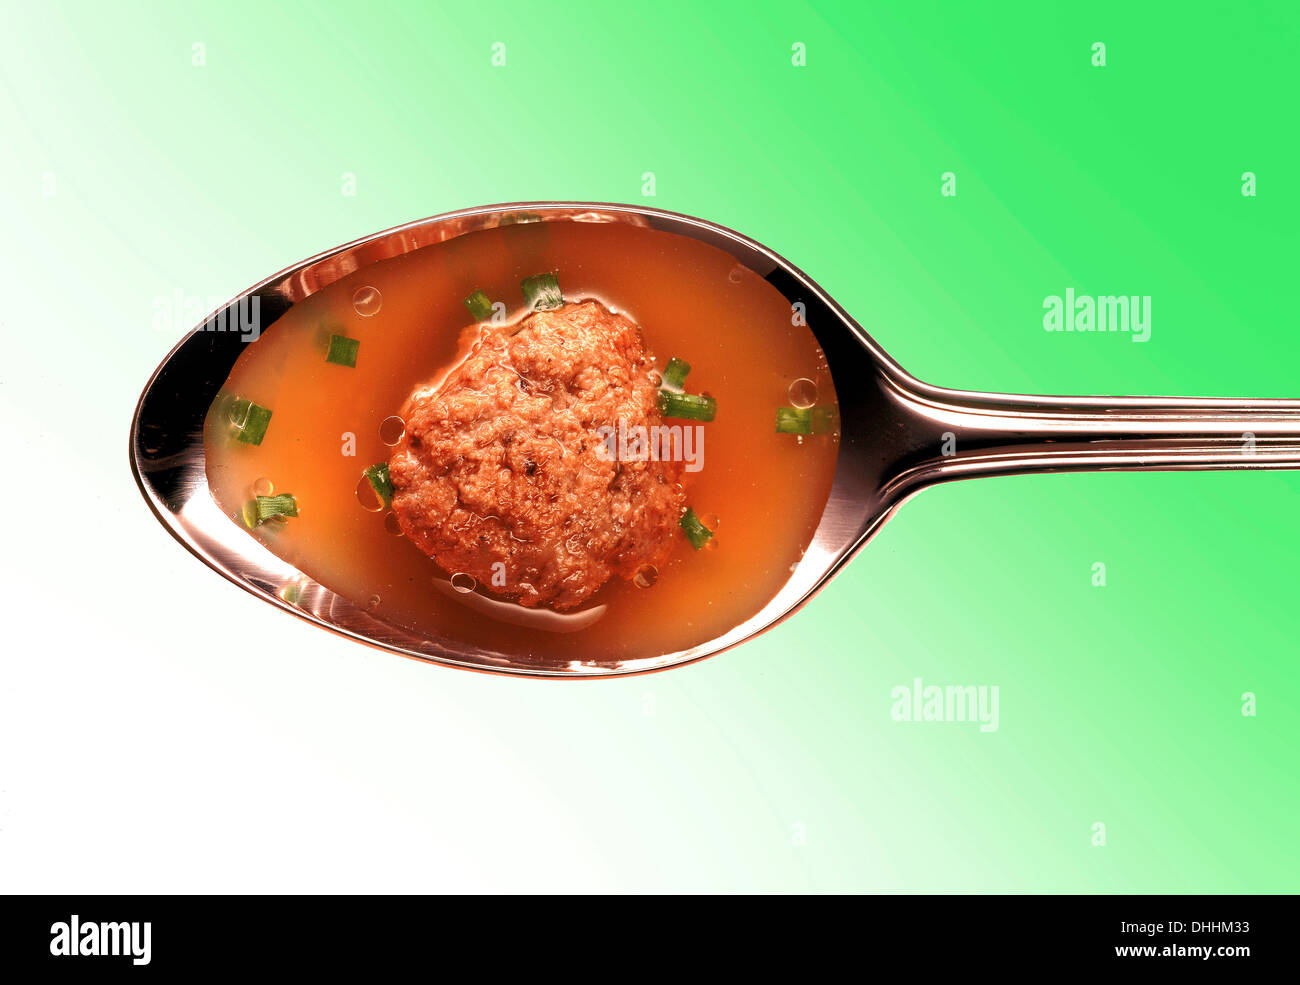 Meatball in broth on a silver spoon Stock Photo